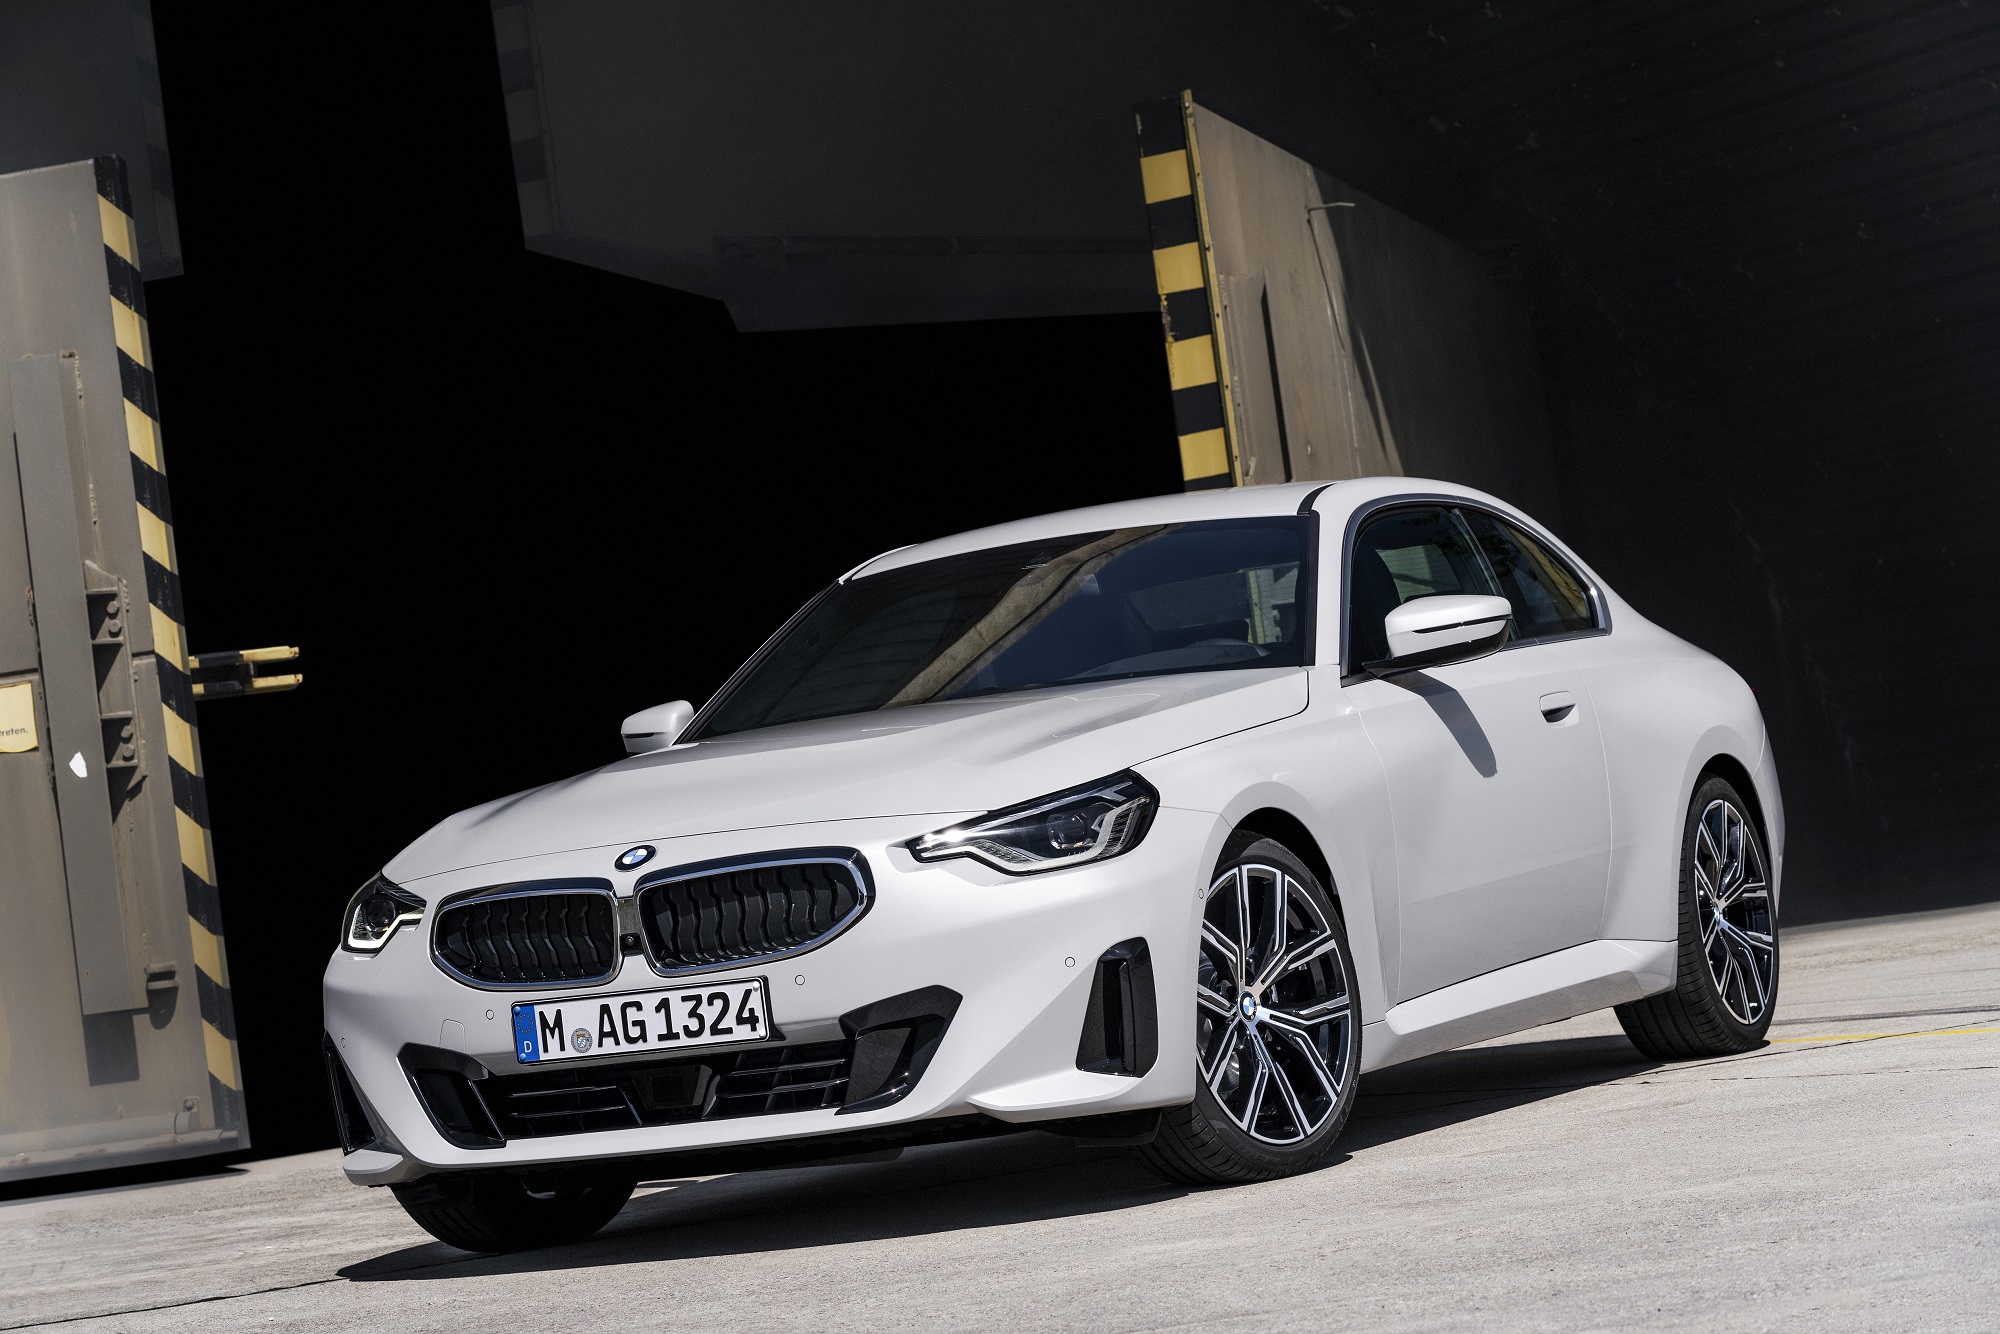 A BMW M240i and its B58 is a powerful combination.